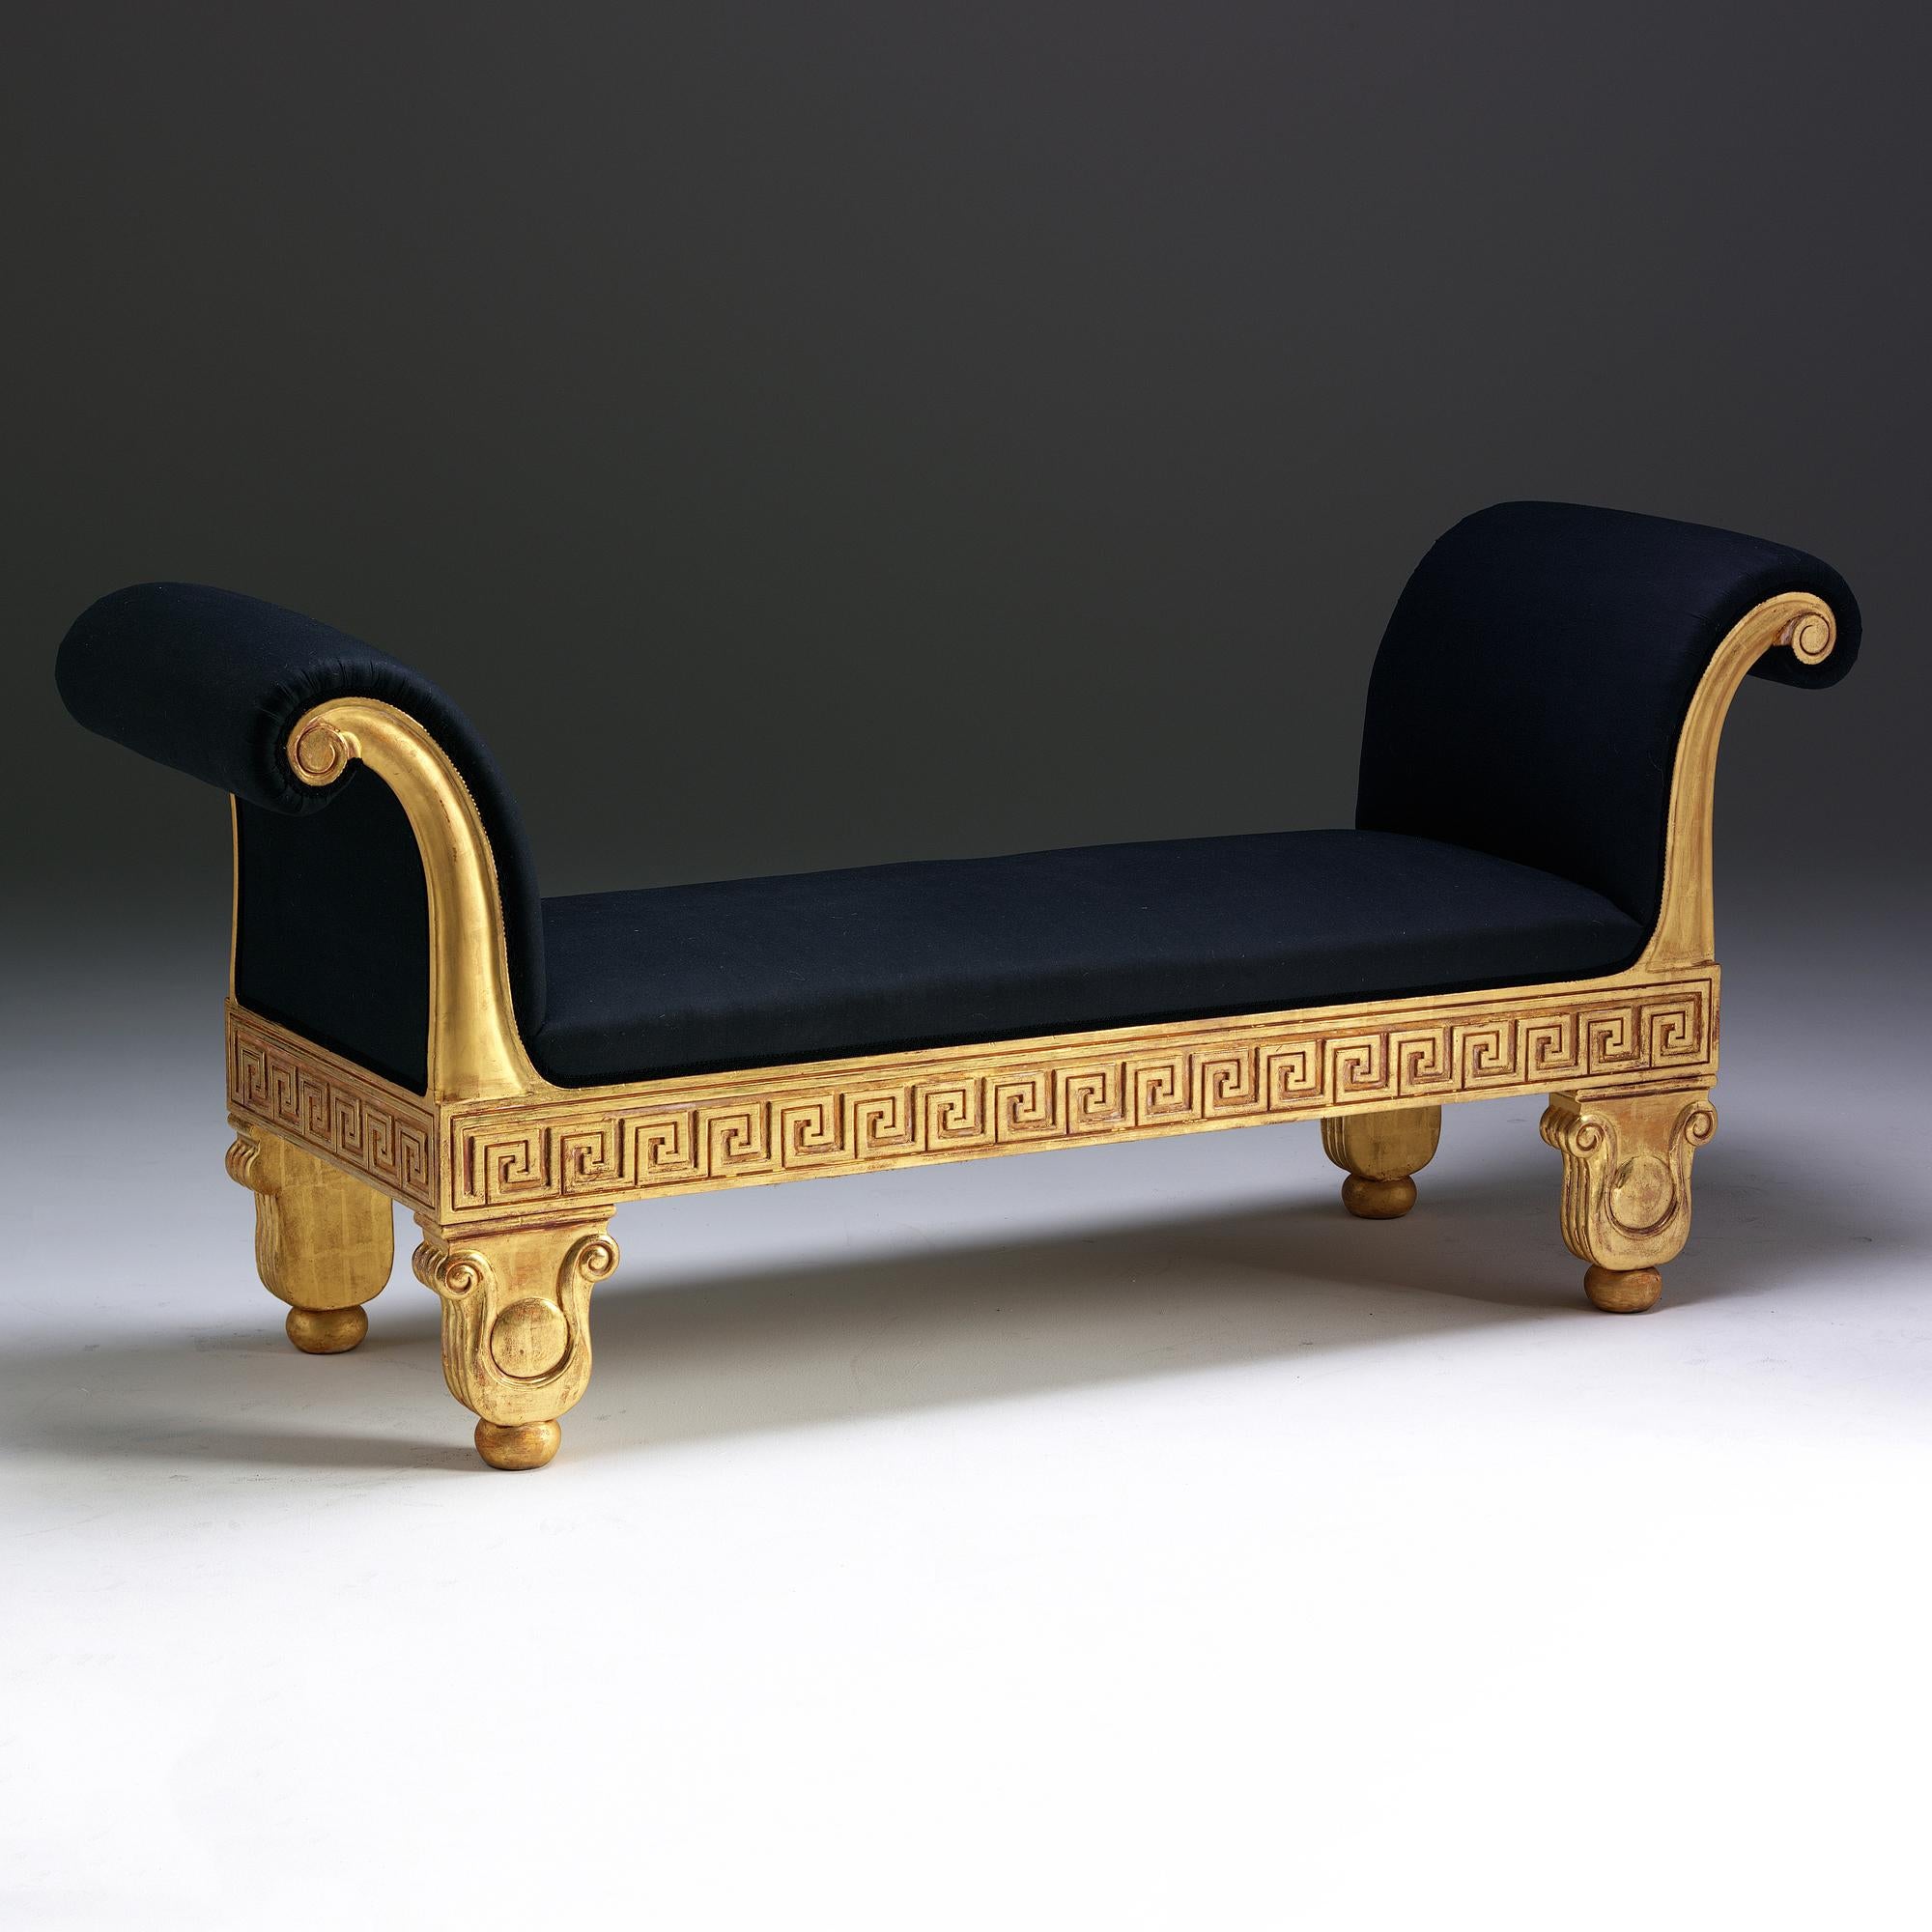 A carved and gilded window seat in the English Regency style. The upholstered and gently curved moulded ends are decorated with carved paterae and rest on Greek key pattern carved rails. The short, lotus leaf shaped legs are centred with paterae and